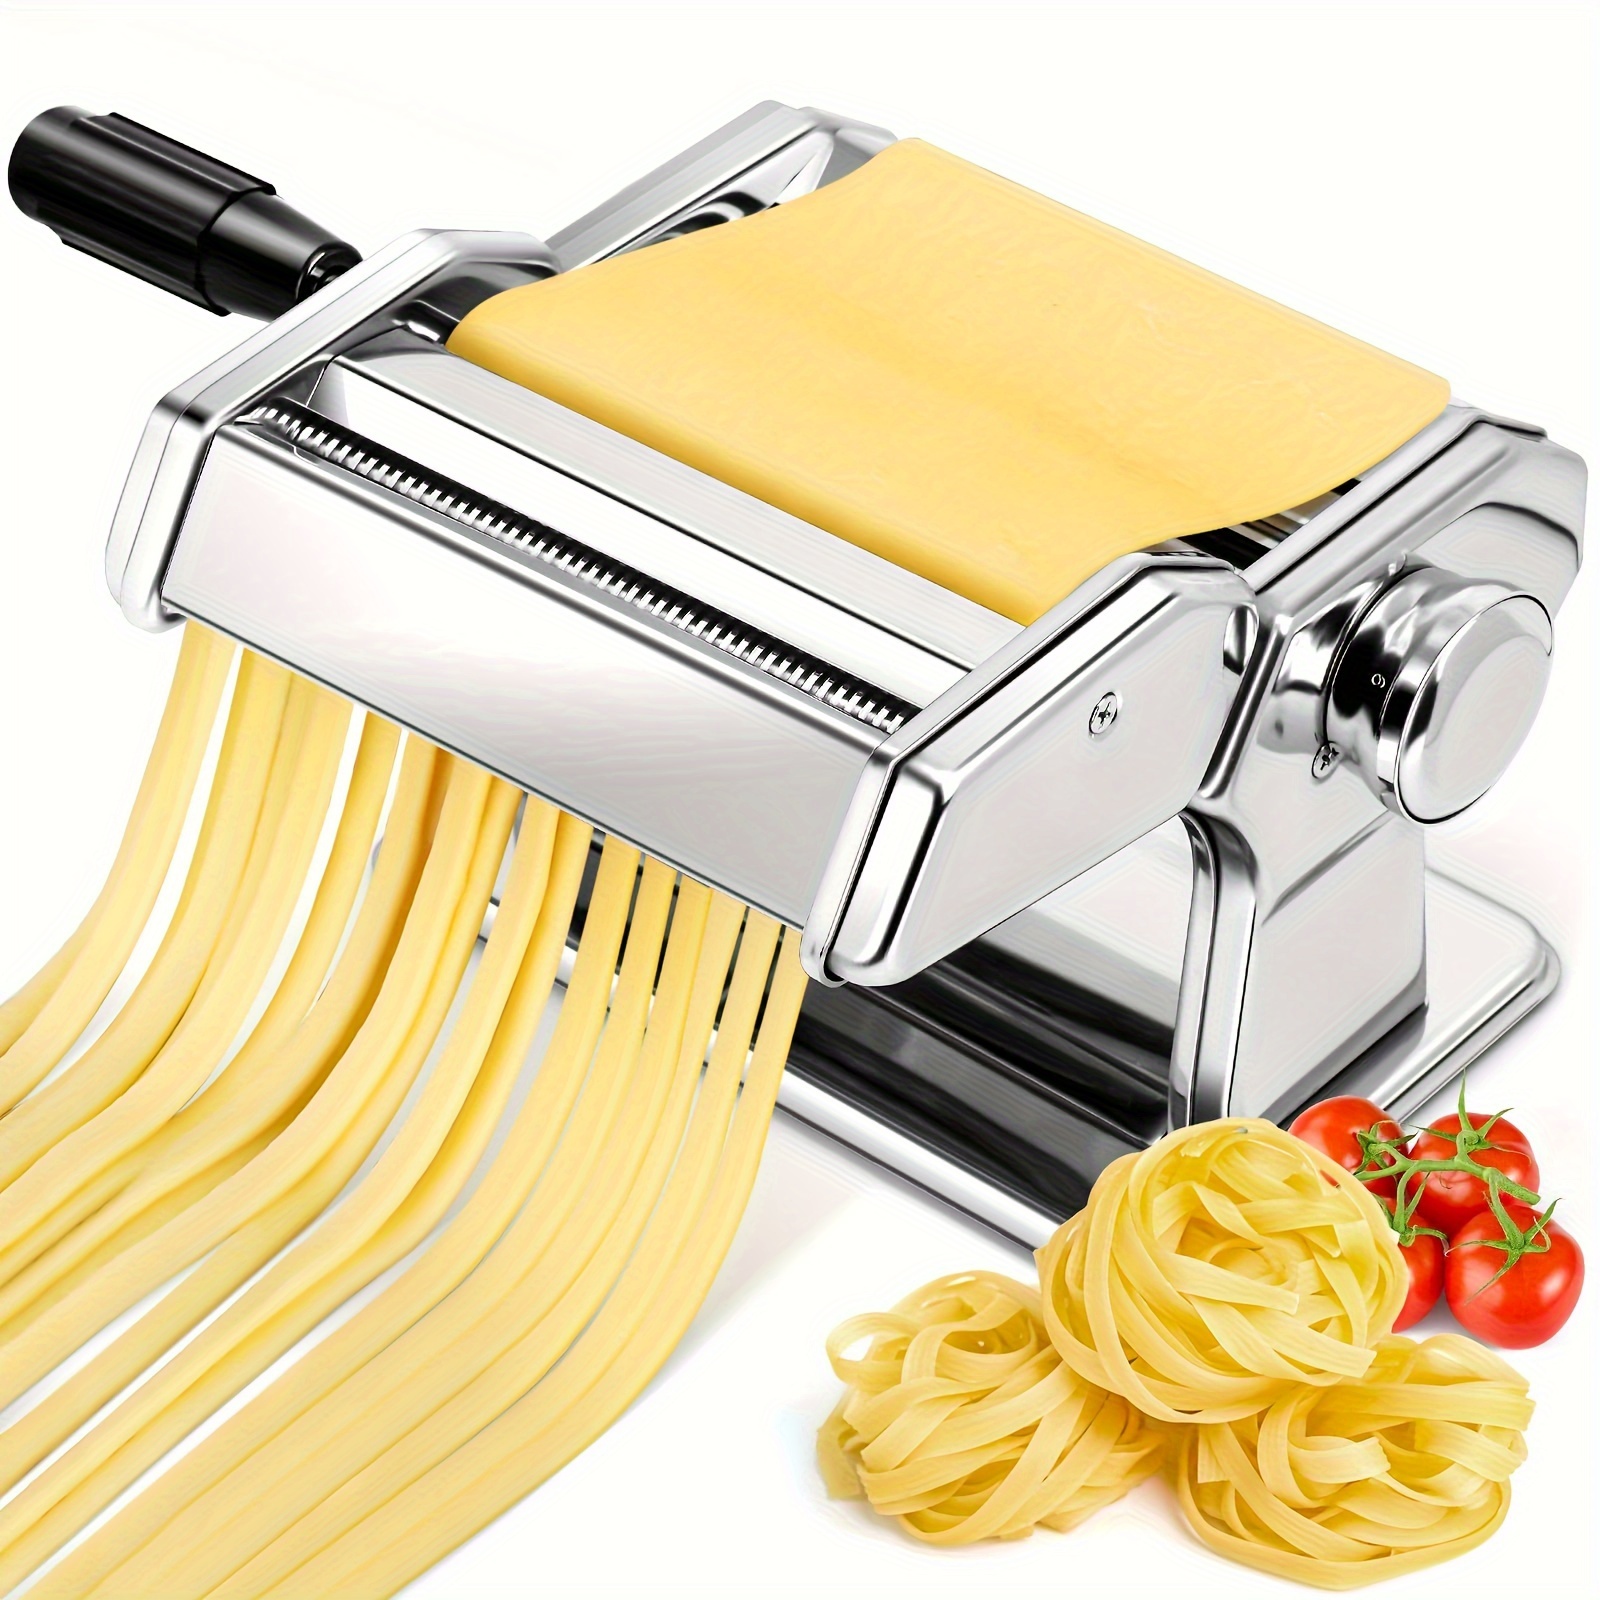 

Manual Pasta Maker Machine, Stainless Steel Pasta Roller And Cutter With 7 Adjustable Thickness Settings, Dual Width Noodle Maker For Pasta, Spaghetti, Fettuccine, Lasagna